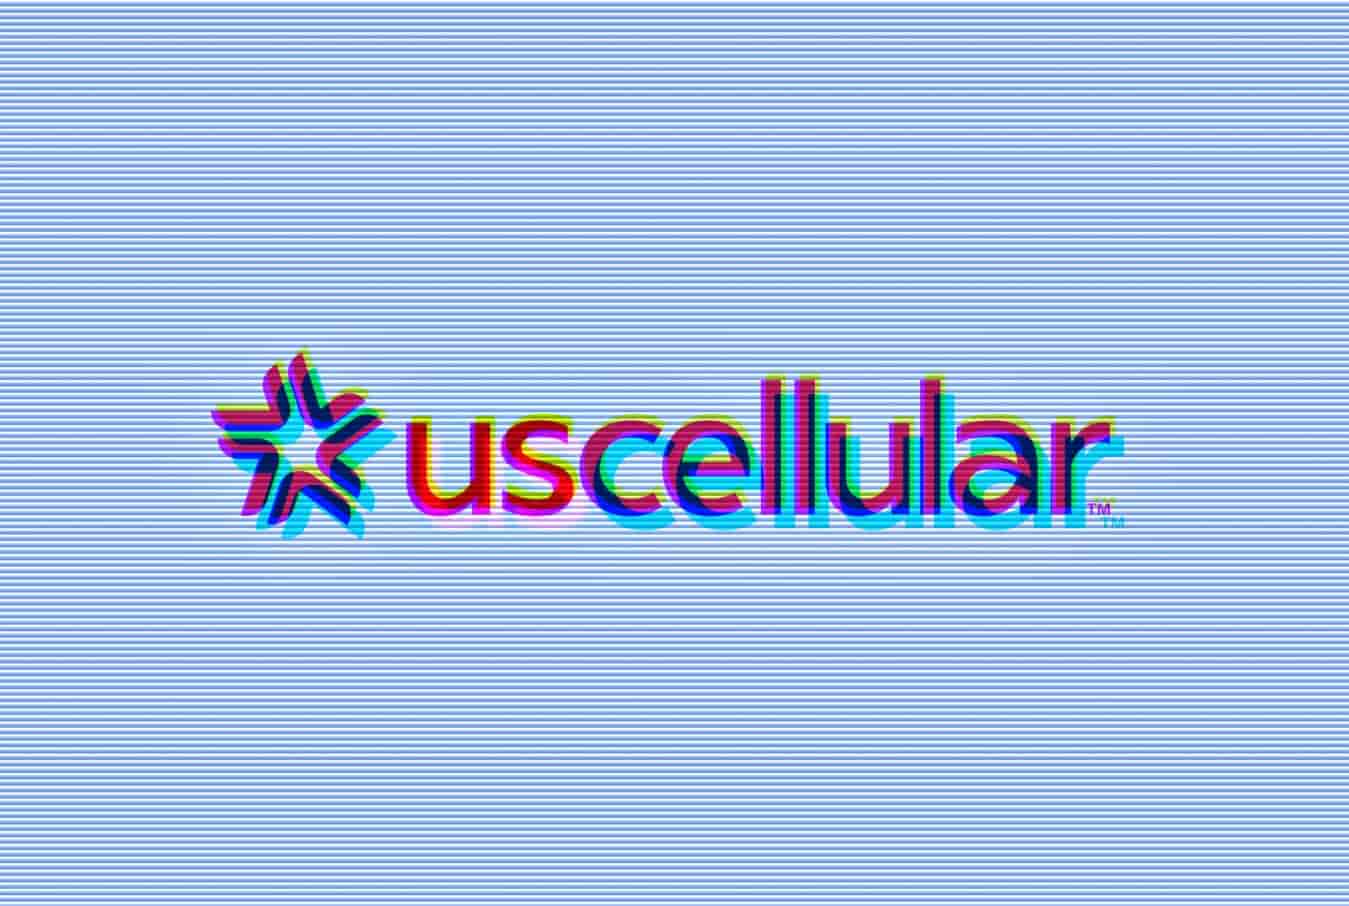 Hackers access customers database by scamming UScellular staff